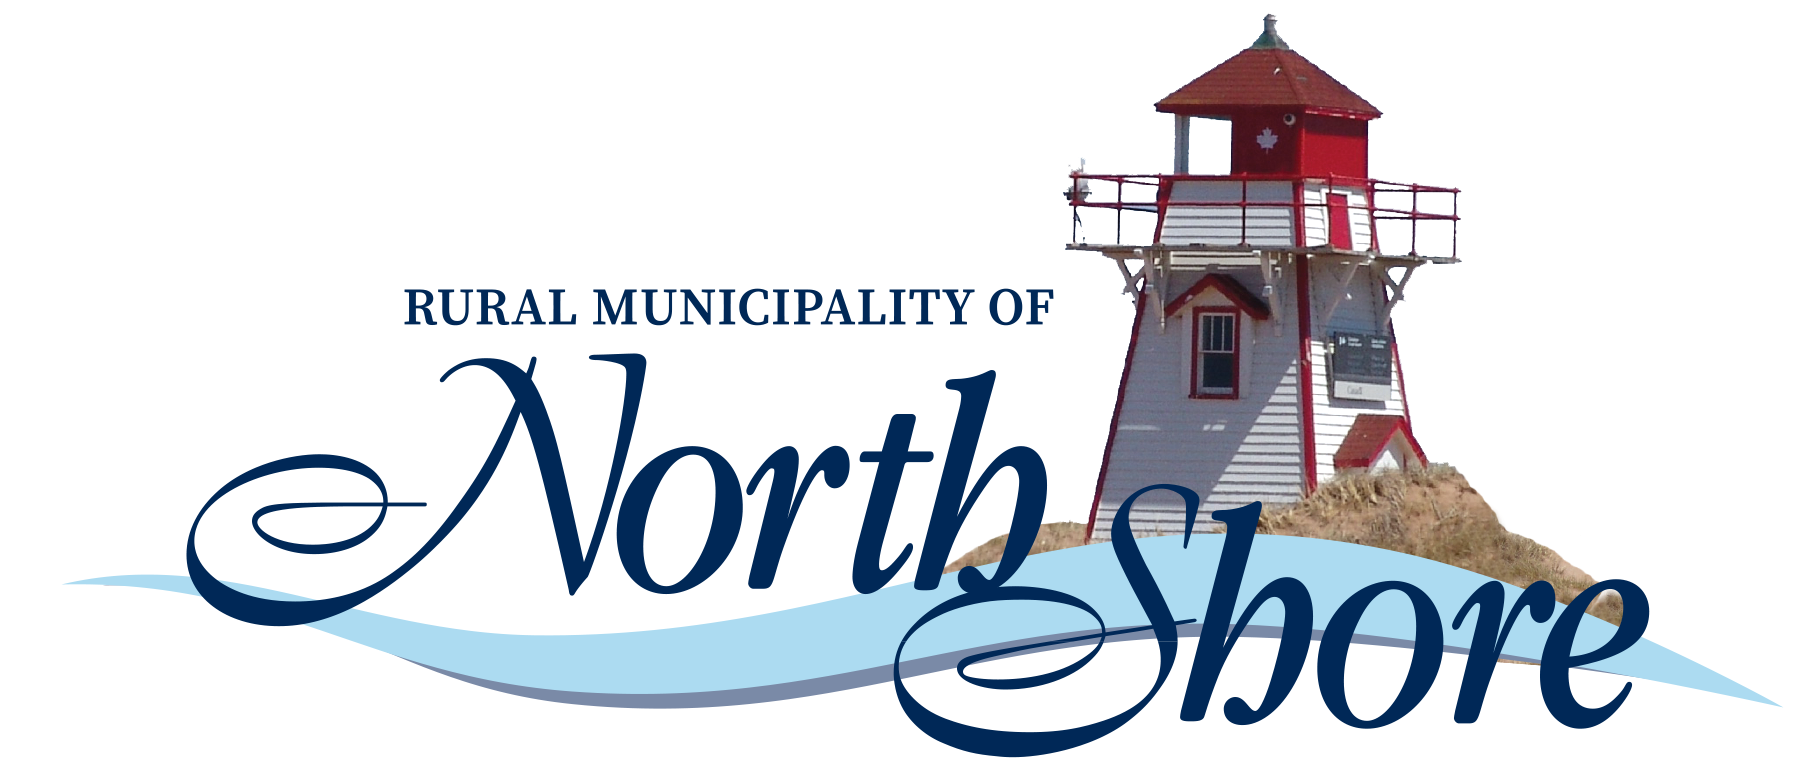 Rural Municipality of North Shore  Welcome to the Communities of West  Covehead, Covehead Road, Stanhope, Pleasant Grove and Grand Tracadie